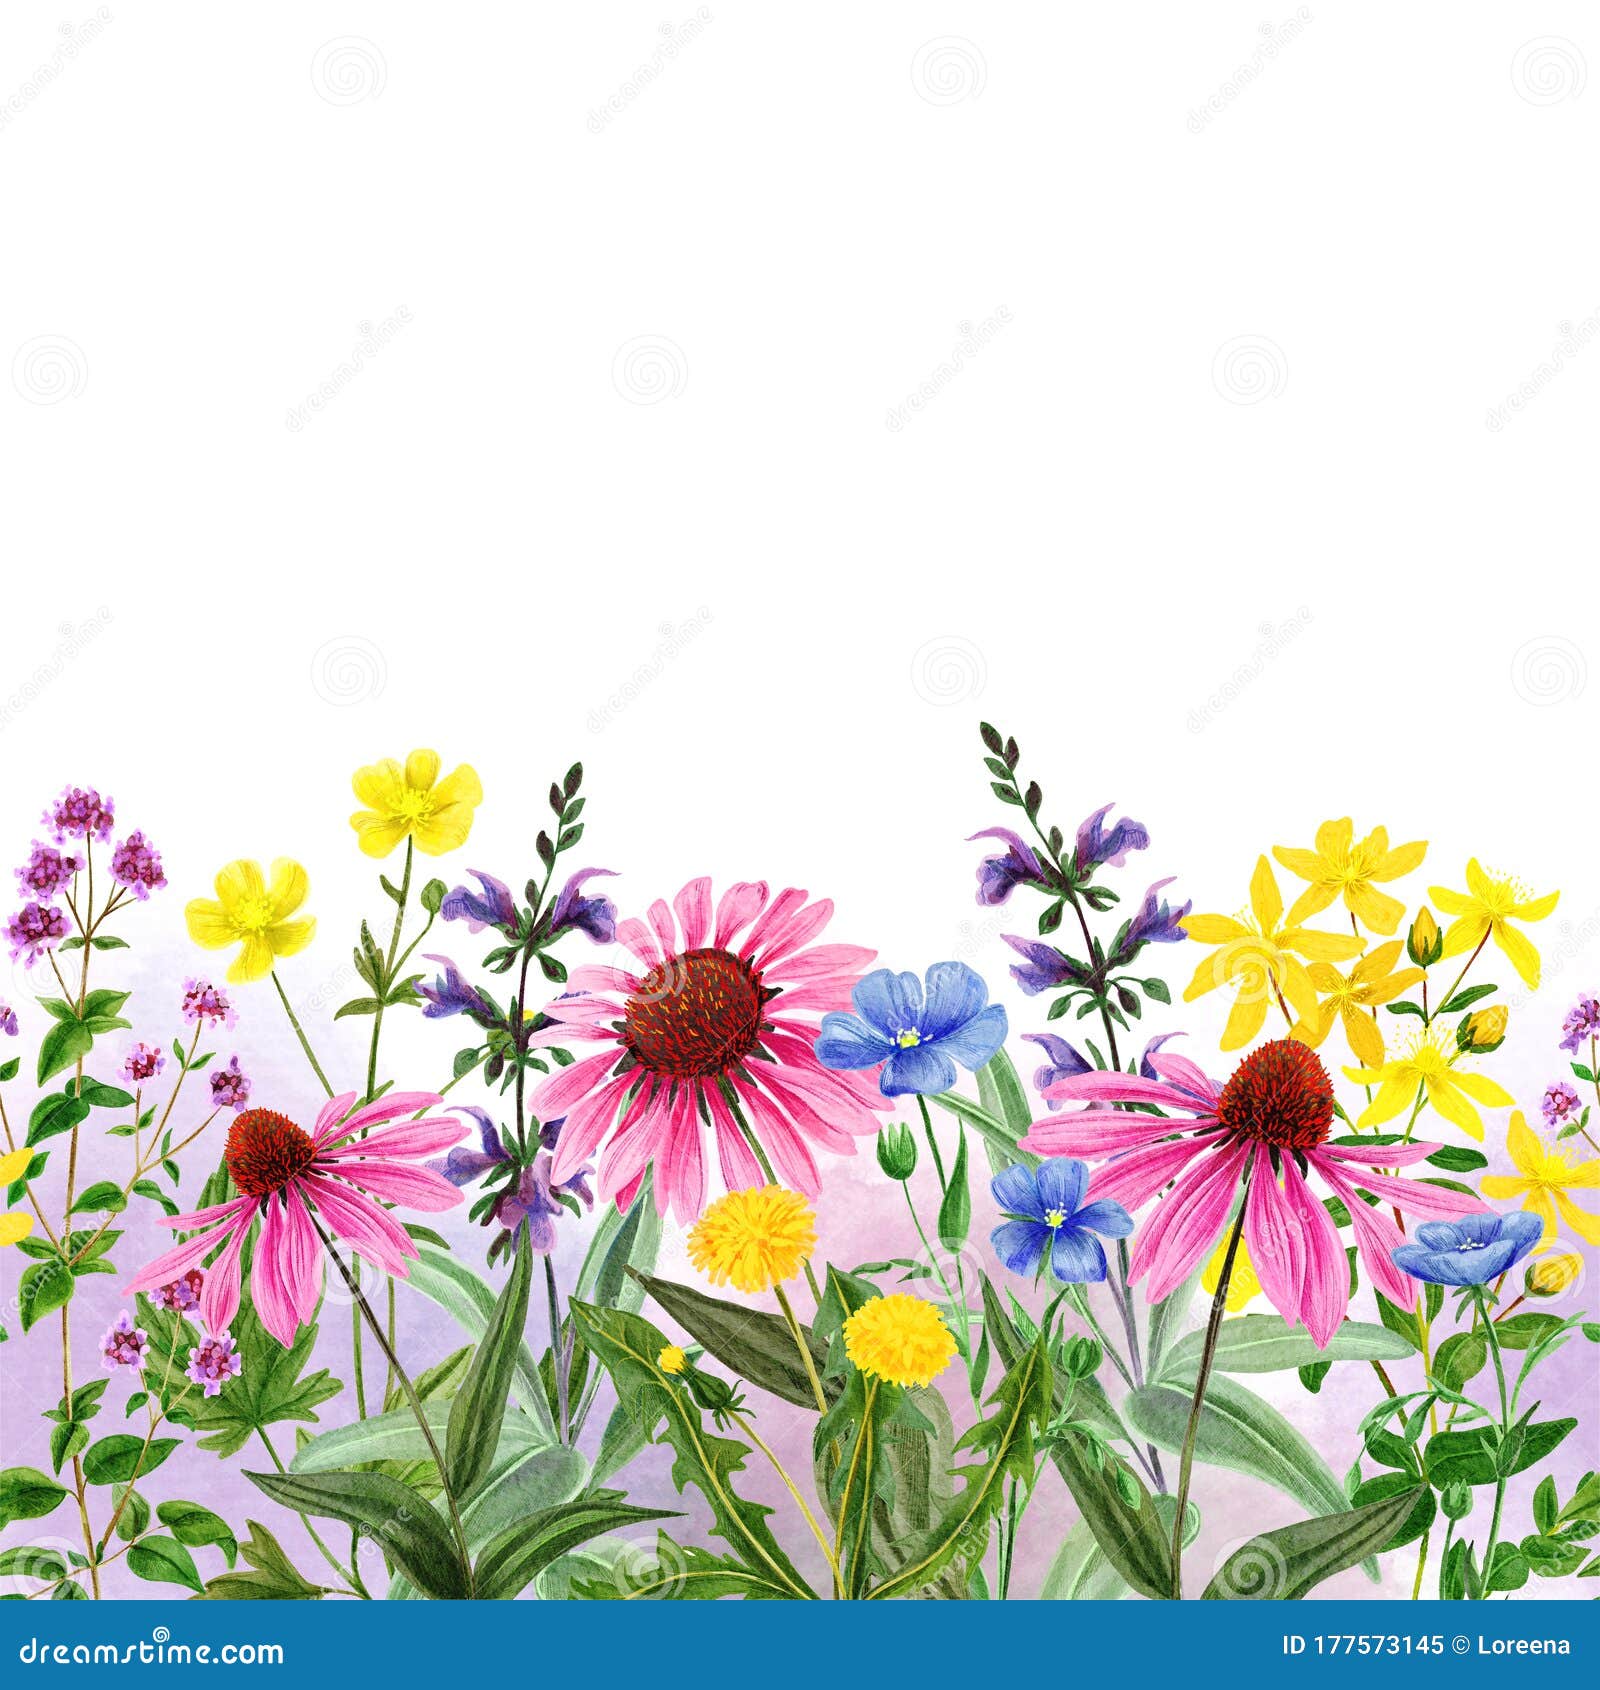 Watercolor Seamless Border Field Wild Flowers And Herbs Hand Drawn